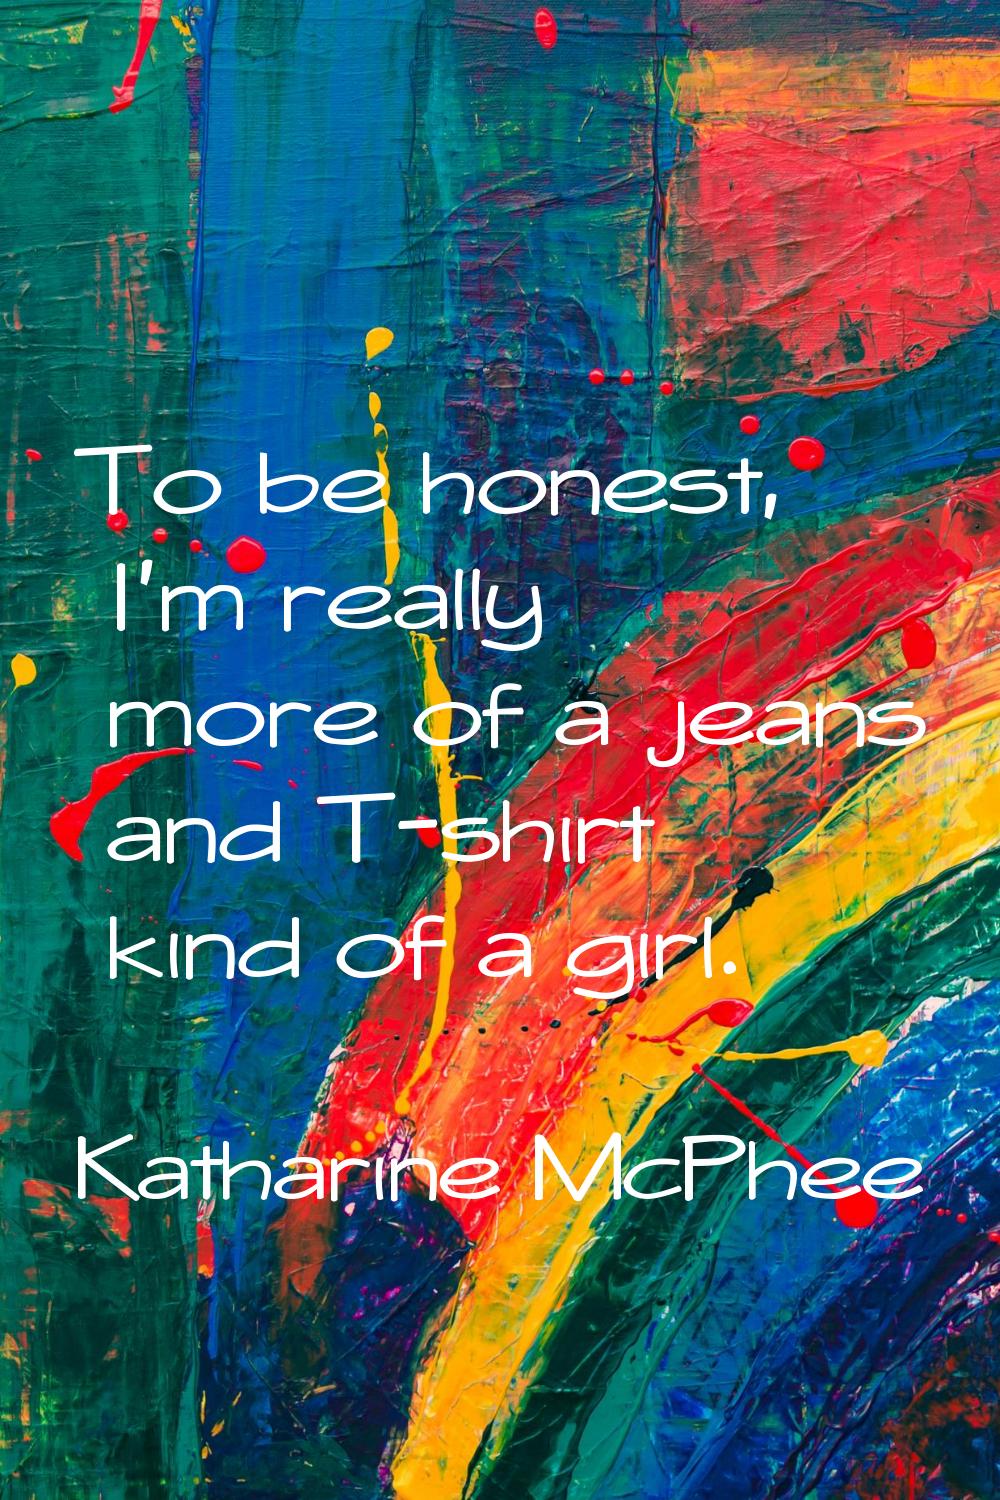 To be honest, I'm really more of a jeans and T-shirt kind of a girl.